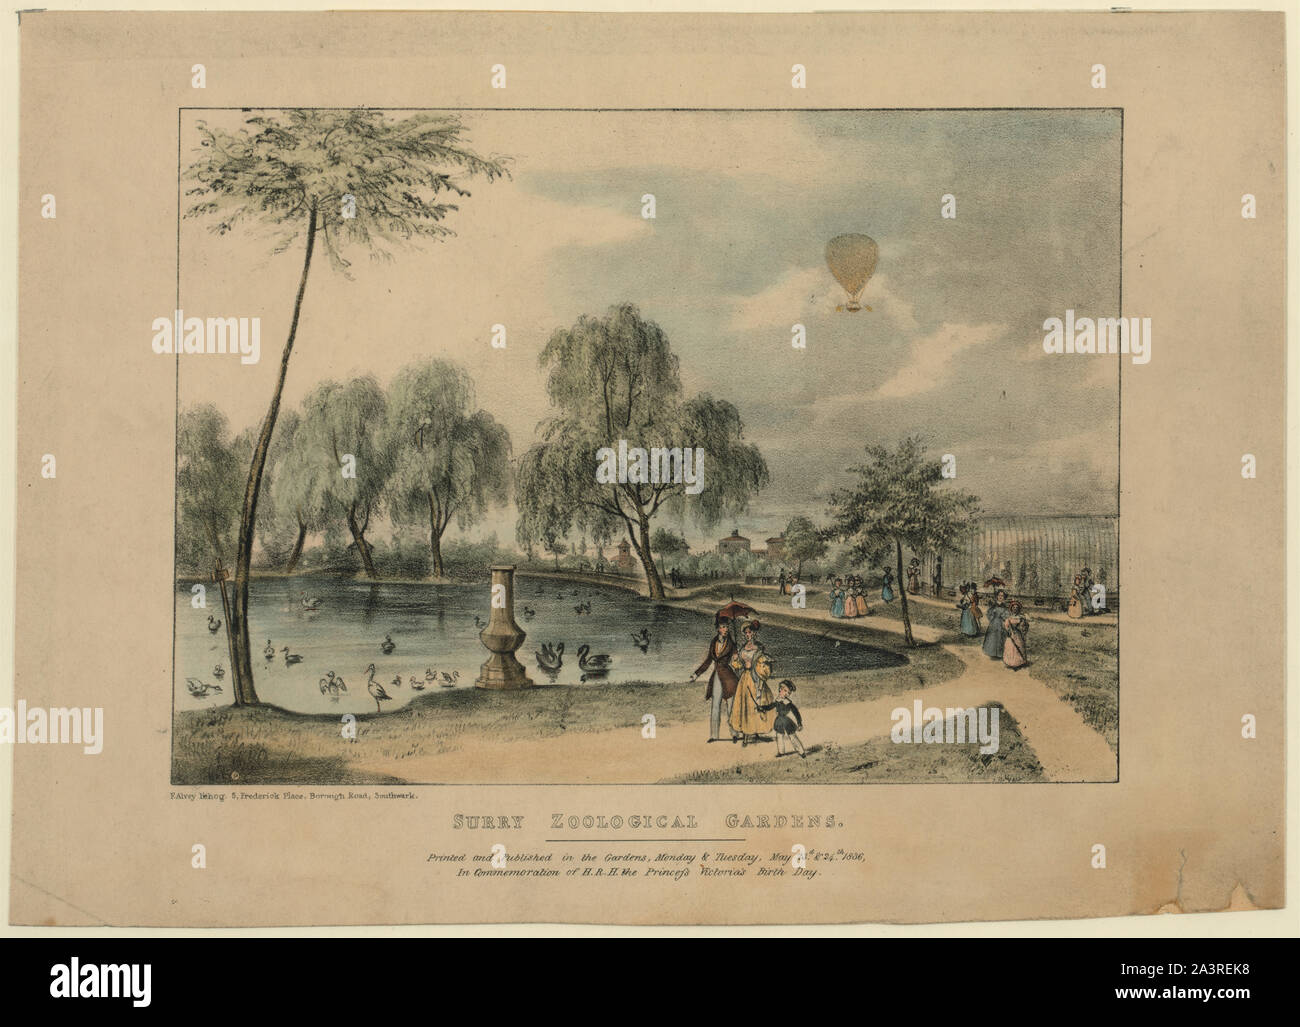 Surry [sic] Zoological Gardens Print shows pond and people walking at the Surrey Zoological Gardens, London, England, with a balloon ascending in the distance. Print commemorates the 17th anniversary of the birth of Princess Victoria, May 24, 1836. (Source: A.G. Renstrom, LC staff, 1981-82.) Stock Photo